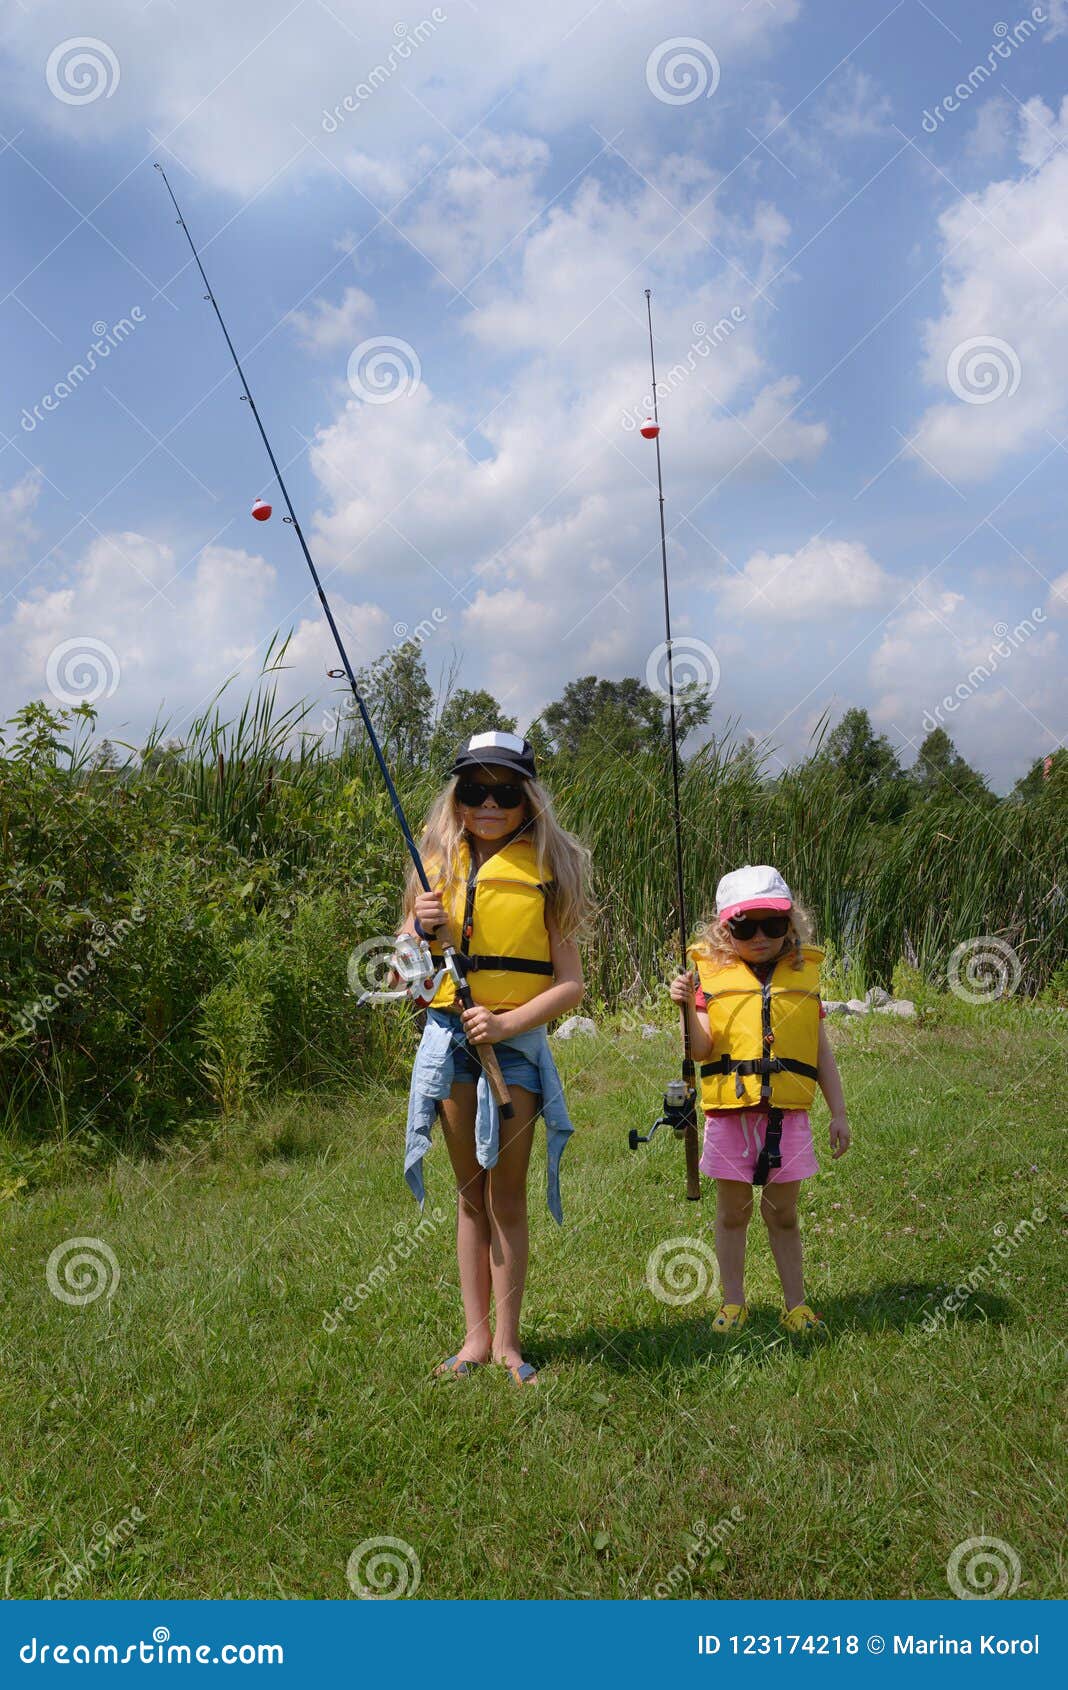 Learn To Fish. Two Amazing Blonde Little Girl with Fishing Rod are